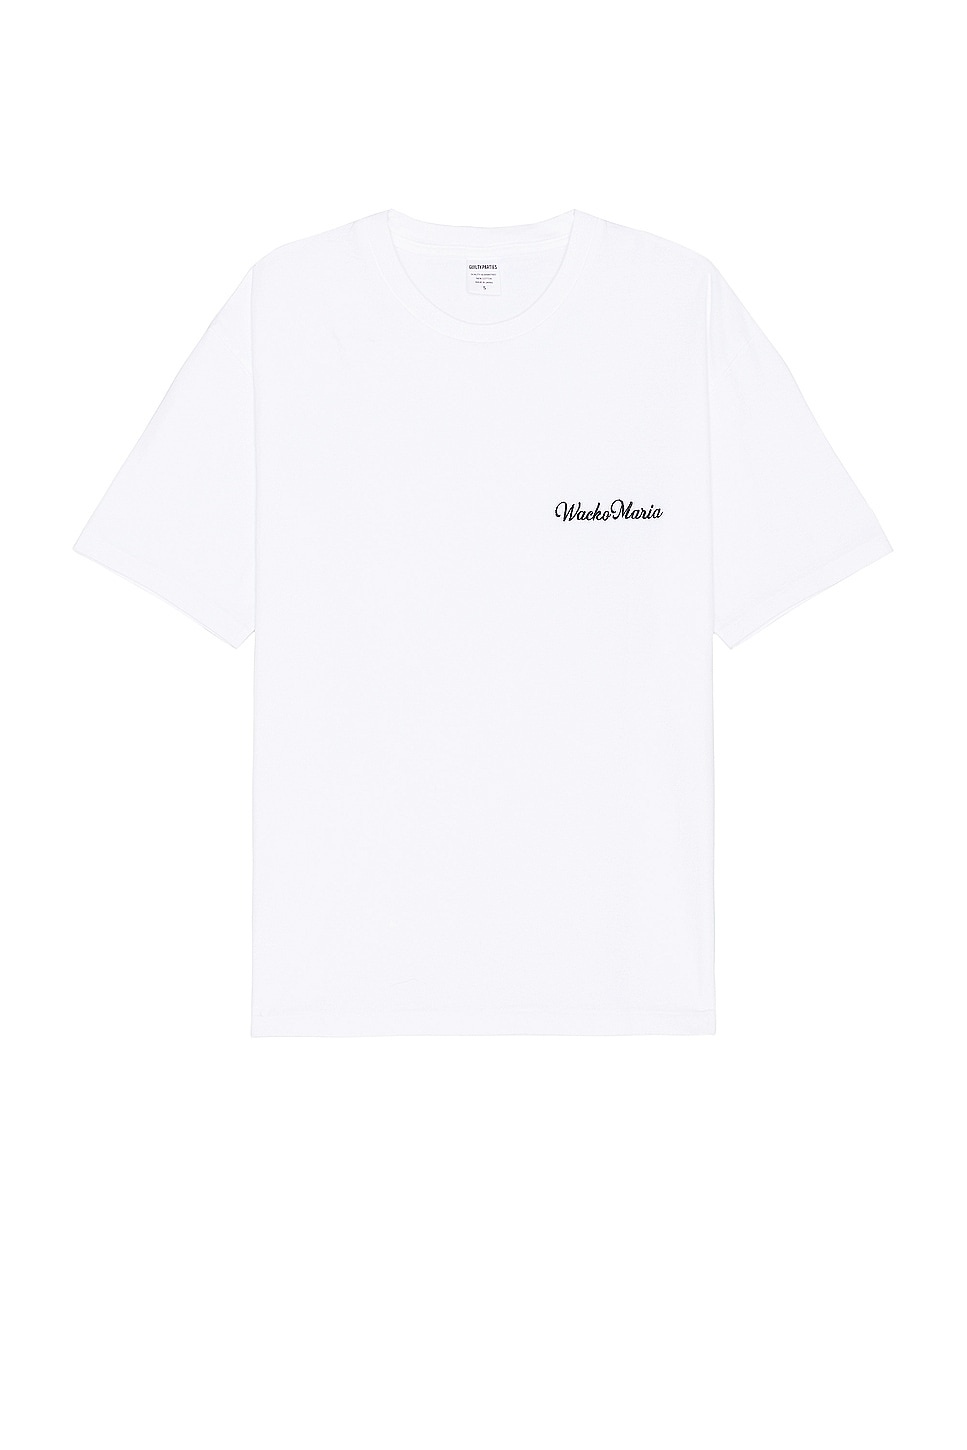 Washed Heavy Weight Crew Neck T-Shirt - 1